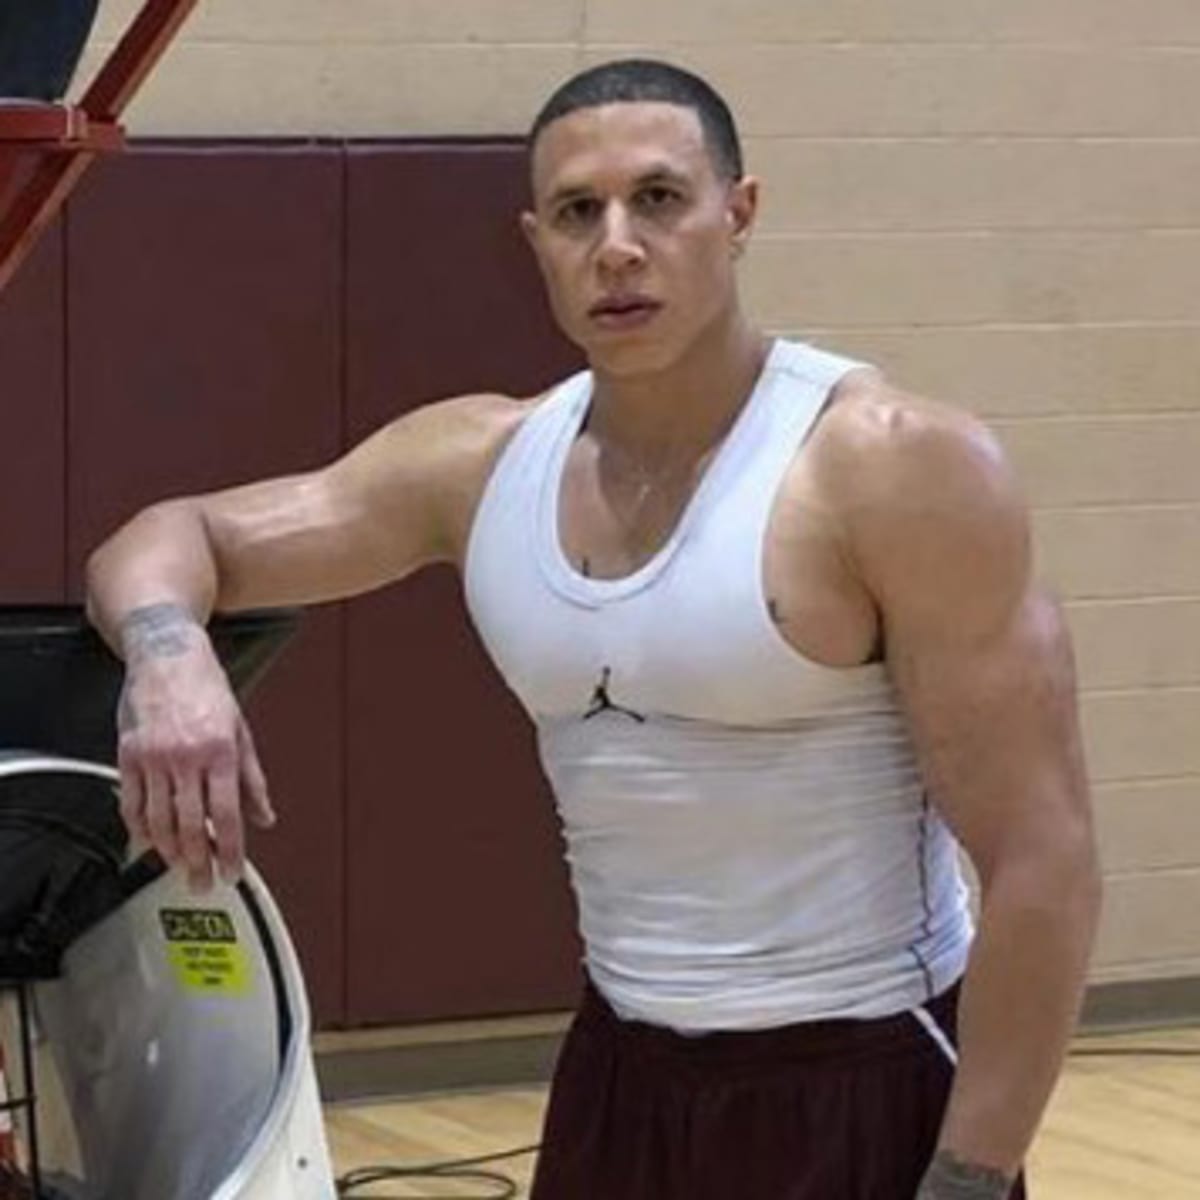 Mike Bibby now looks jacked: Photo of ex-NBA guard - Sports Illustrated